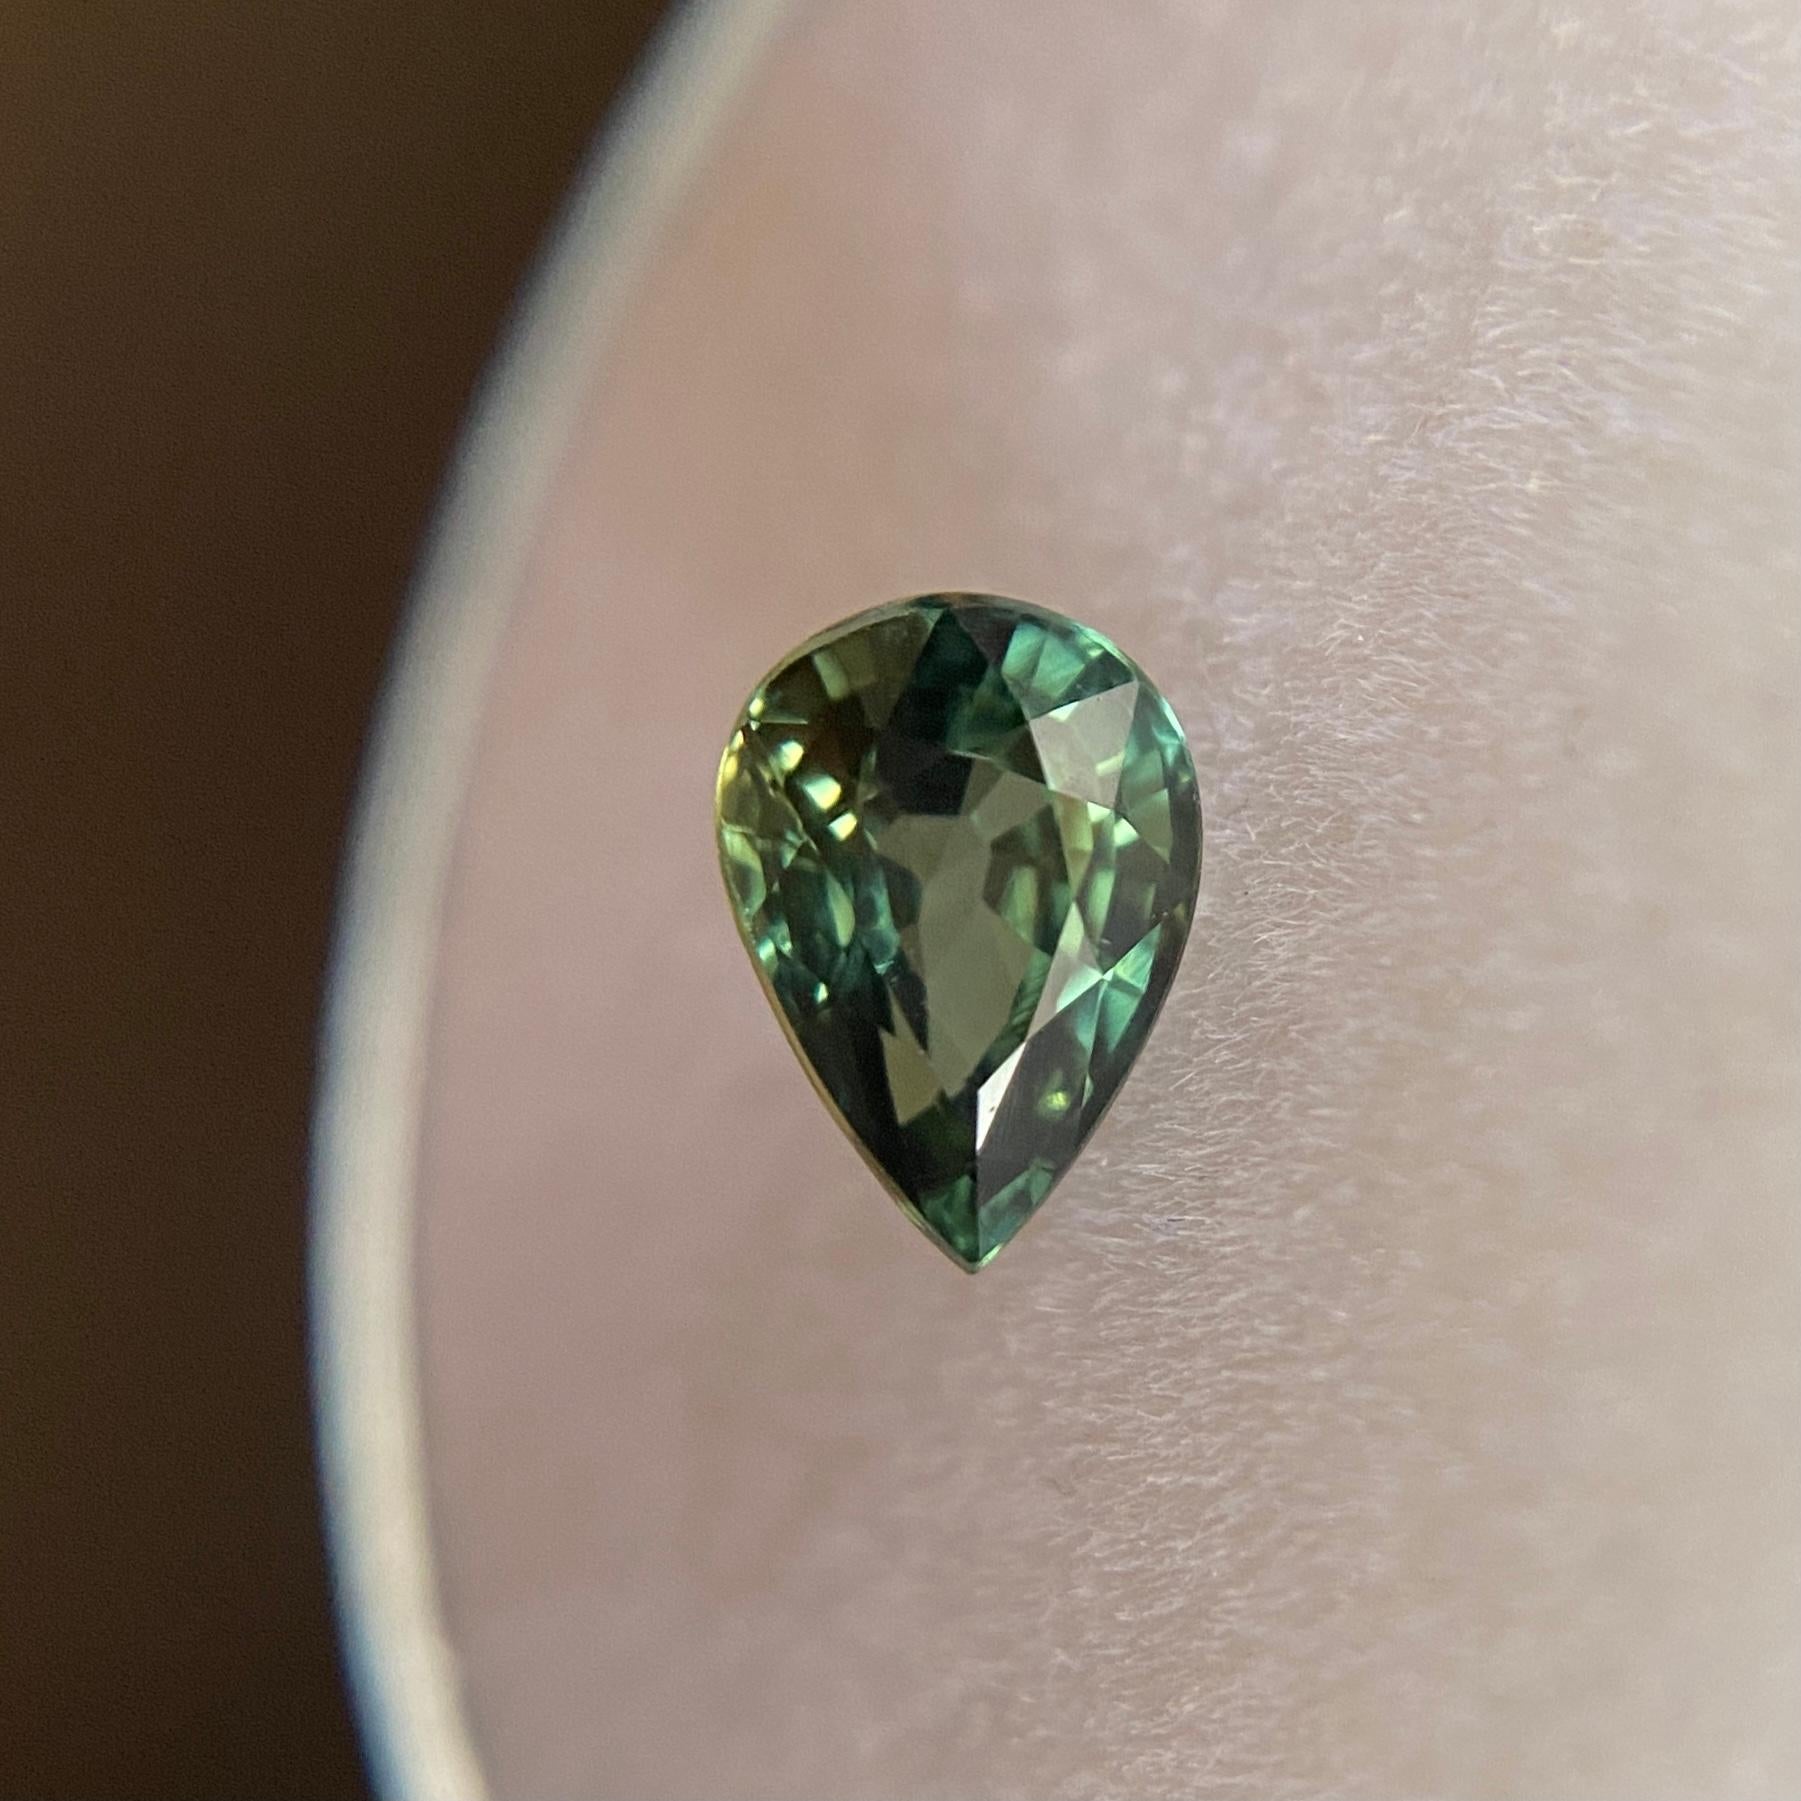 Untreated Greenish Blue Parti-Colour/Bi colour Australian Sapphire Gemstone.

0.90 Carat with a beautiful and greenish blue colour and excellent clarity, a very clean stone.

Also has an excellent pear cut and polish to show great shine and colour,